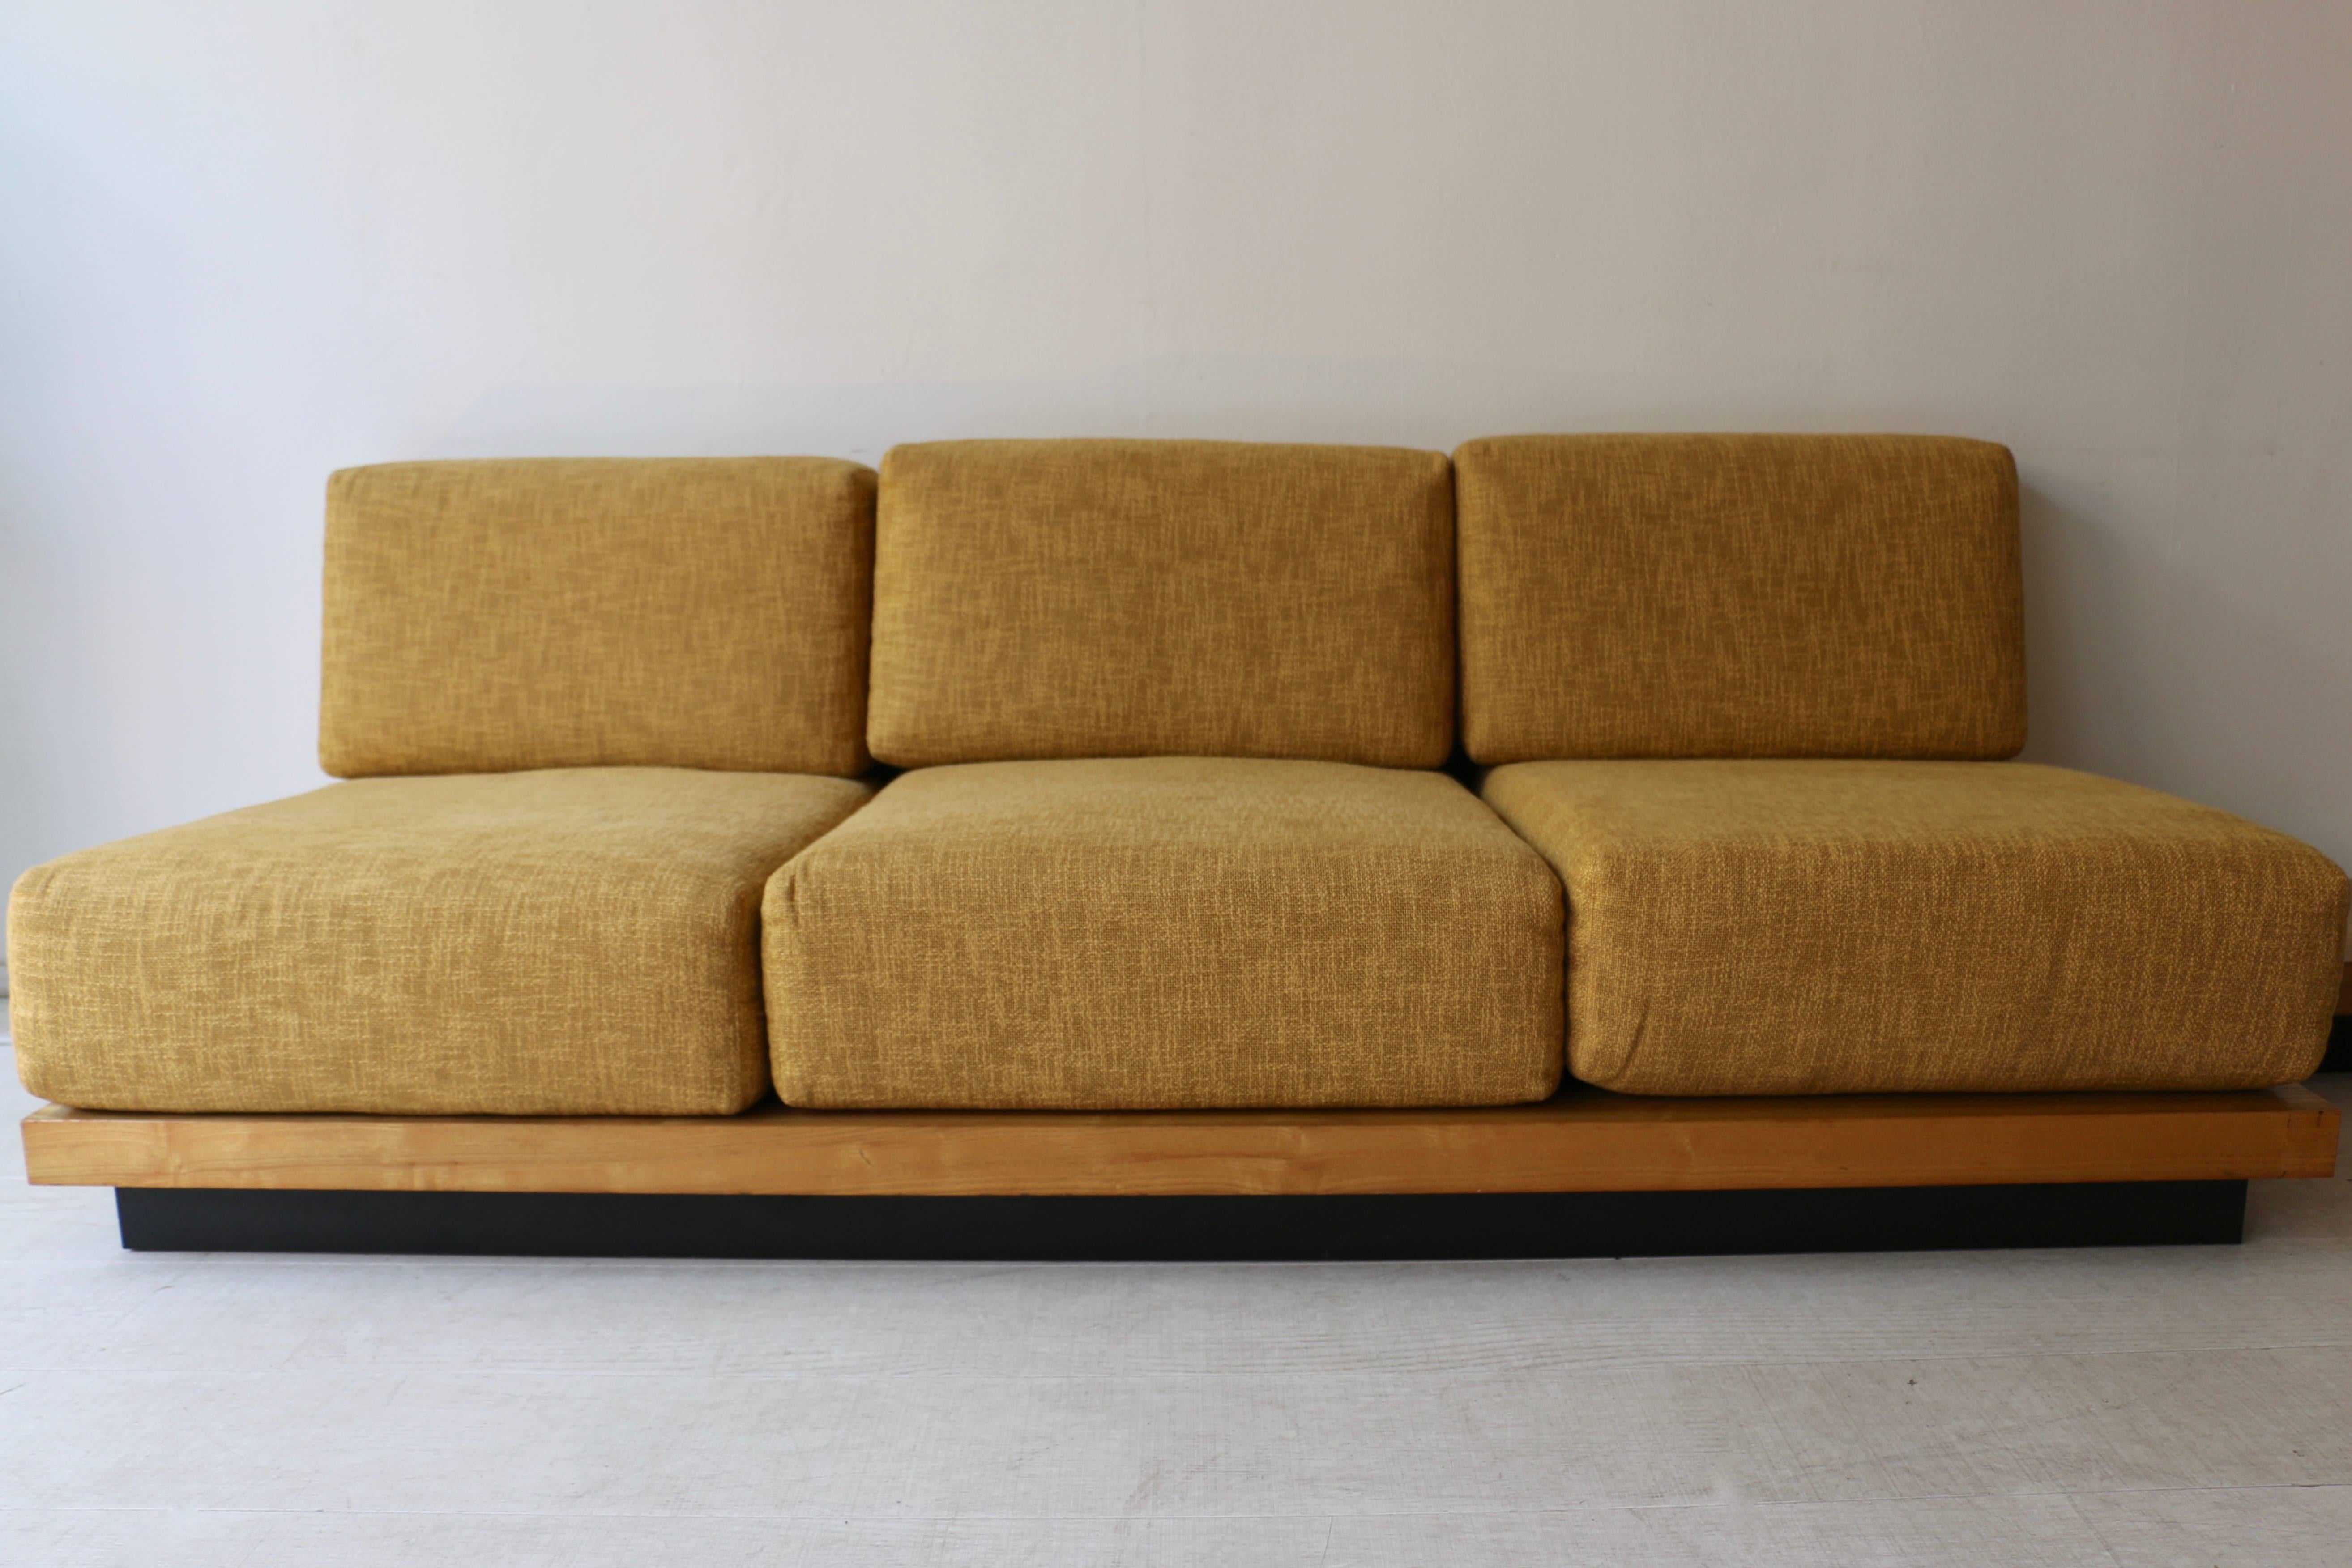 Gustave Gautier (1911-1980)
Unique piece deigned in 1961 for a villa in Cannes, France.
Three seats sofa in light wood veneer with yellow fabric cushions.